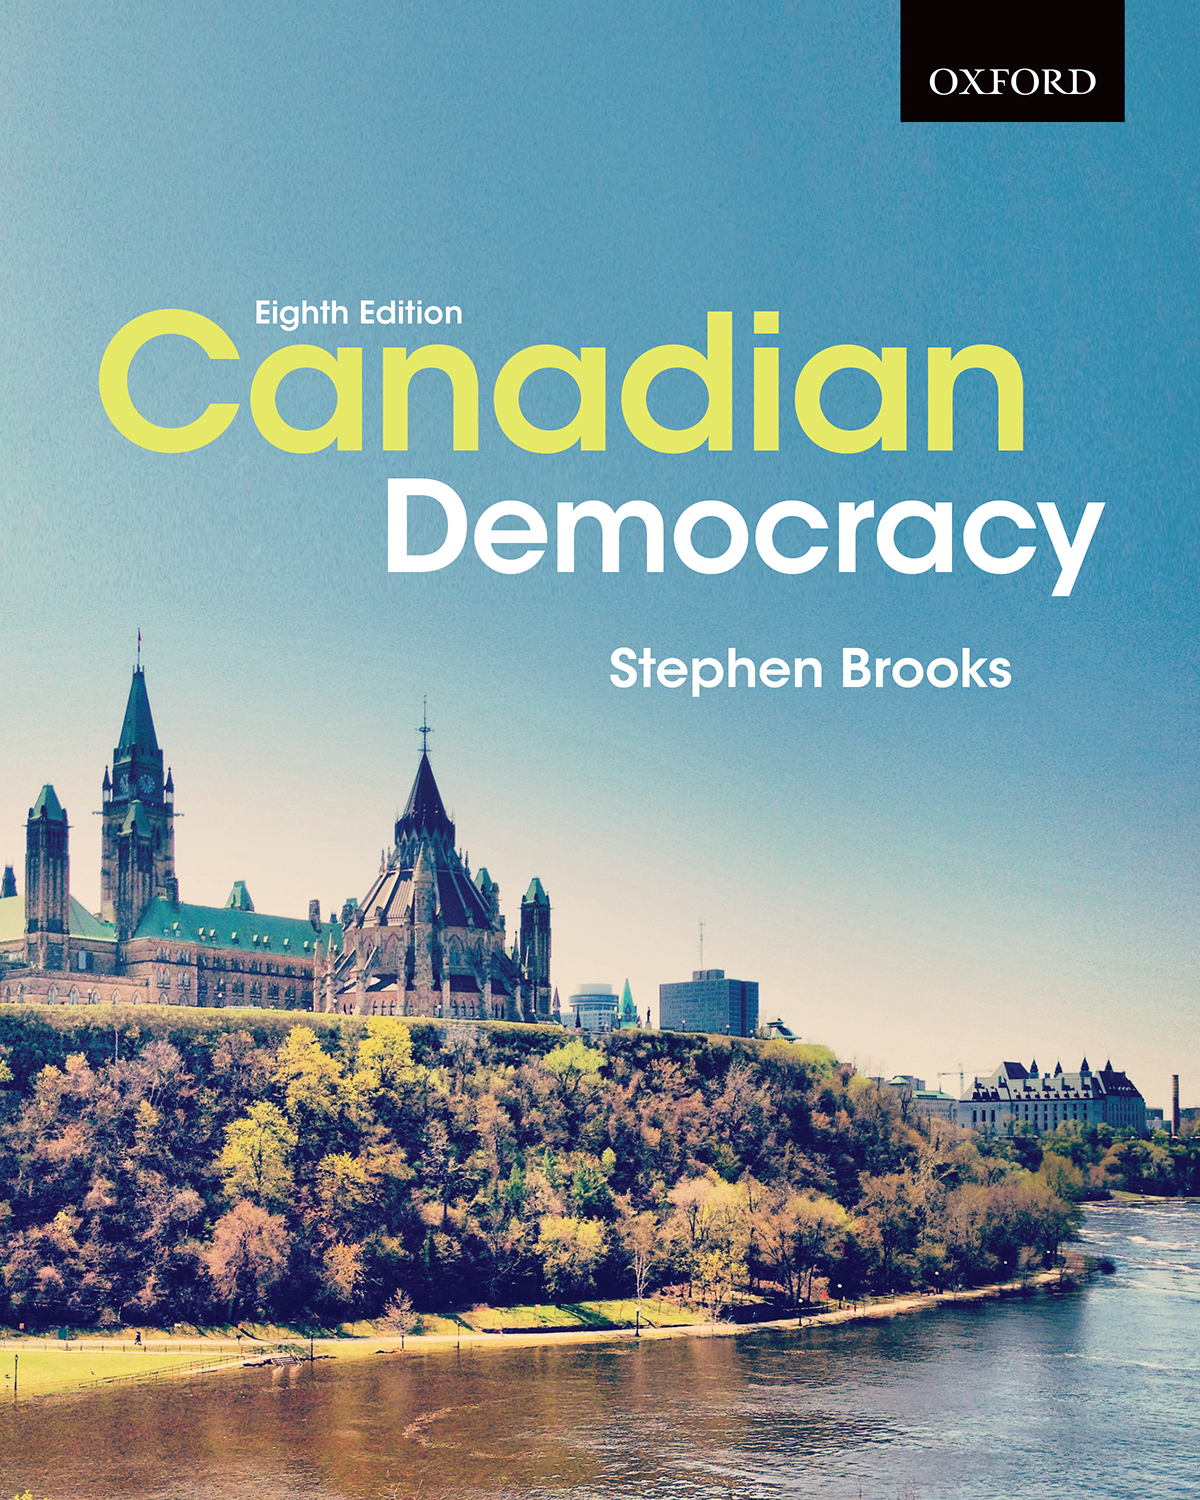 brooks "Canadian Democracy" book cover